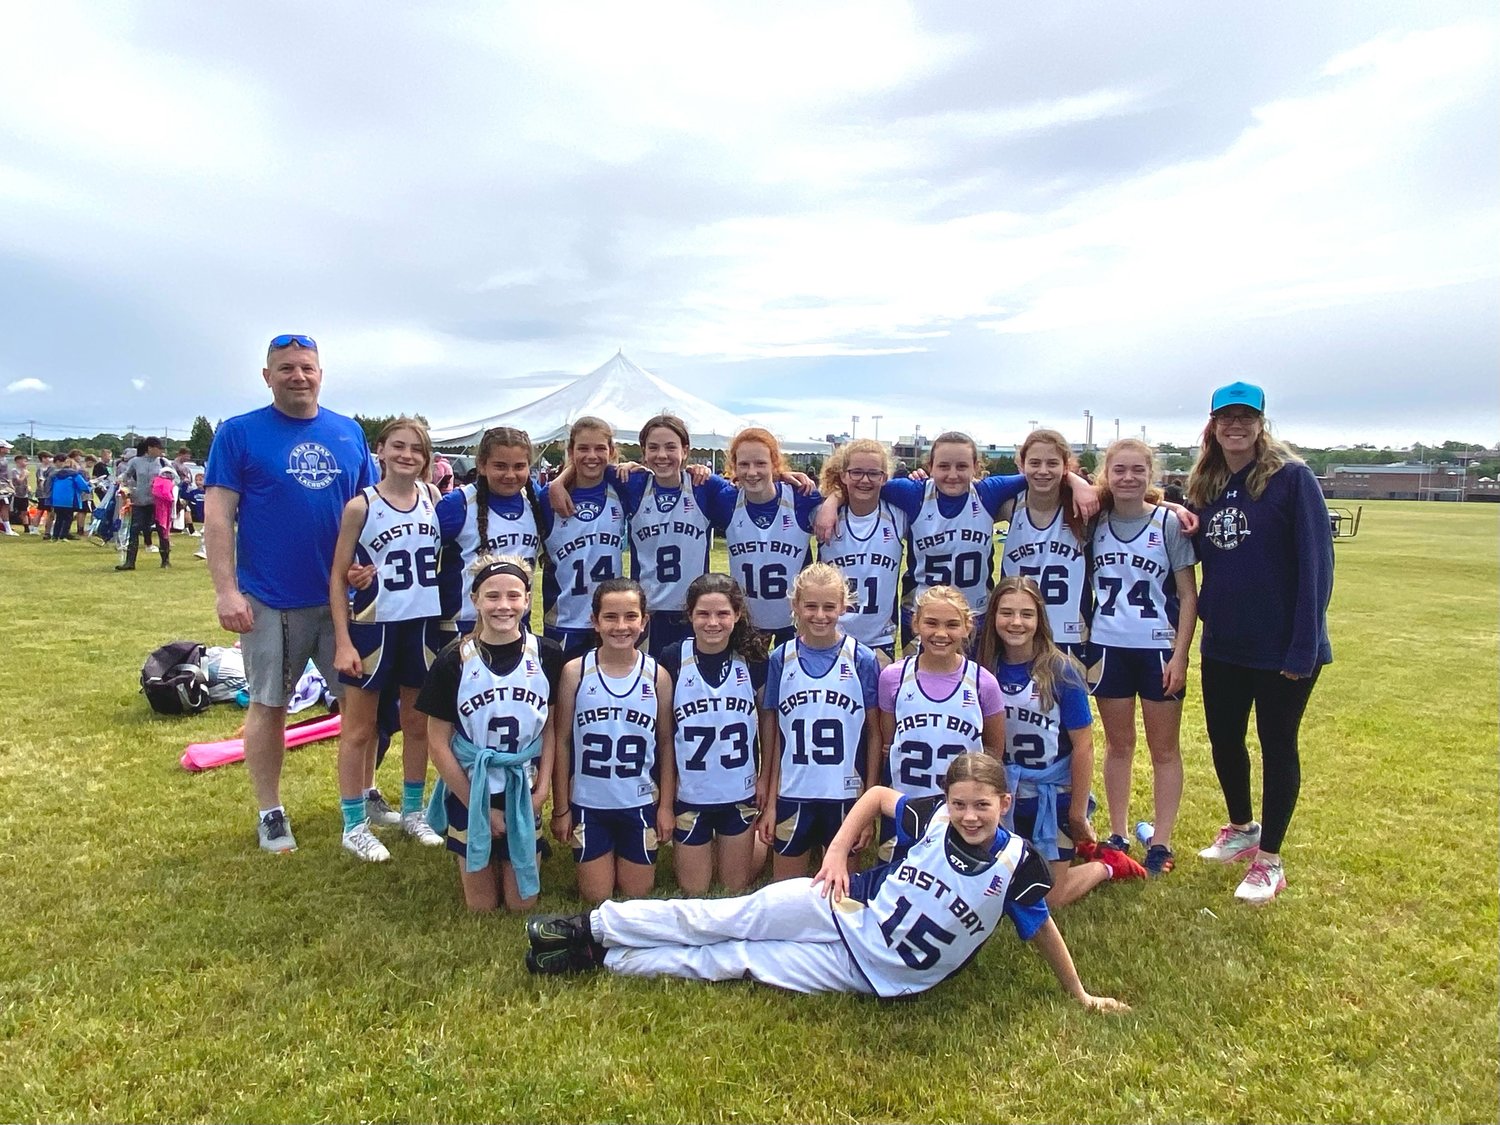 Members of the East Bay Lacrosse Grades 5/6 Division team pose for a photograph after winning the state championship. Pictured are (from left to right, back row) Brad Wilson, Eleanor Lial, Maria Lamb, Charlotte Farrell, Clare Capozza, Ella Martin, Adelaide Crosby, Stella Tisdale, Grace Wilson, Reese Mancini and Cerissa Blaney, (front row) Kendall Blaney, Molly Reagan, Keira Martin, Nina Hansen, Daisy Moscrop and Tessa Lapinski, and (laying in front) Avery Fisher. Not pictured is Julia Alessandro.